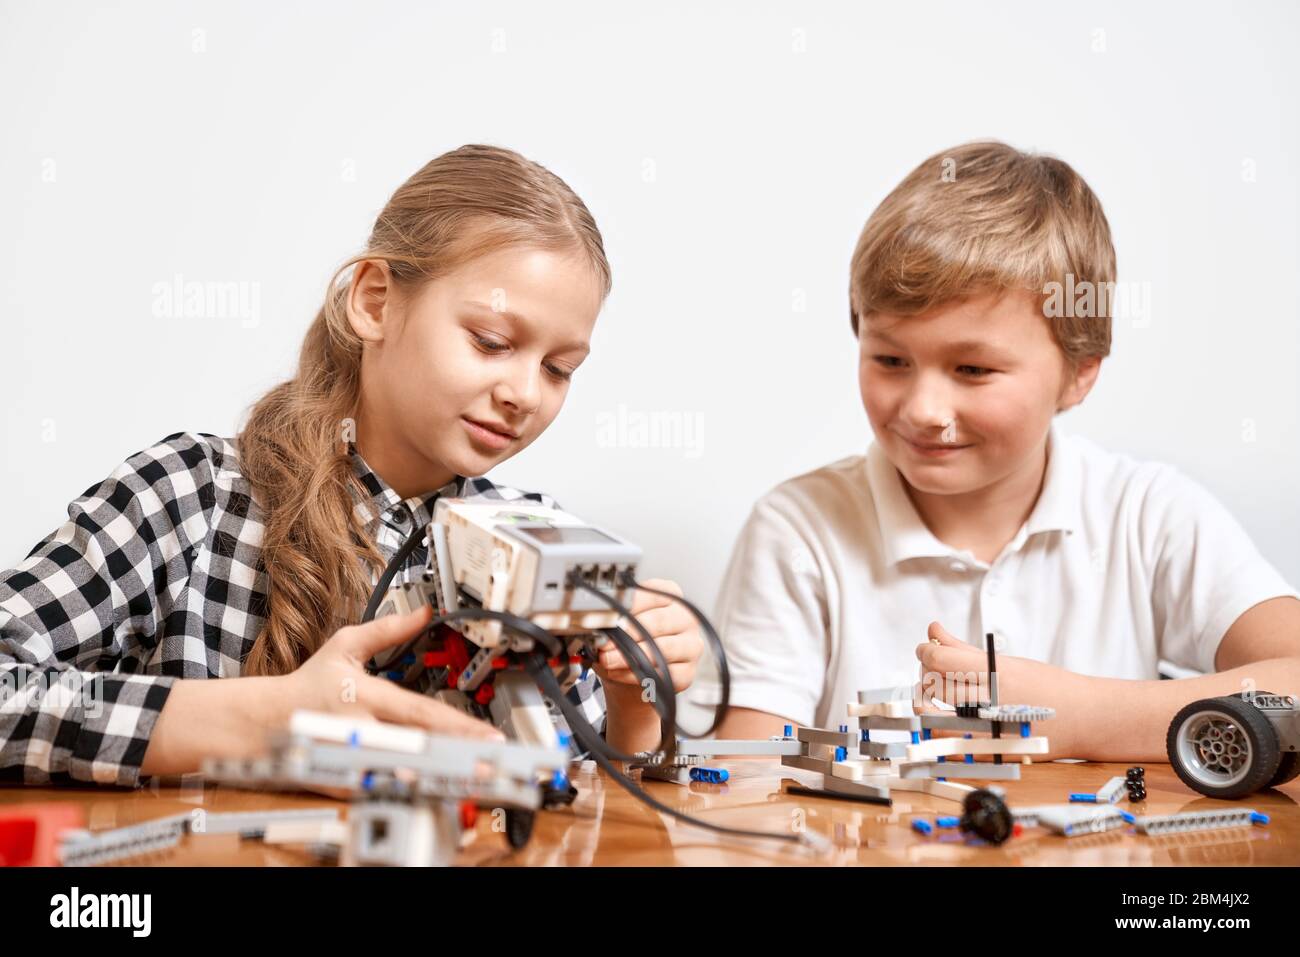 Front view of boy and girl having fun, creating robot. Science engineering. Nice interested friends smiling, chatting and working on project together using interesting building kit for kids on table. Stock Photo